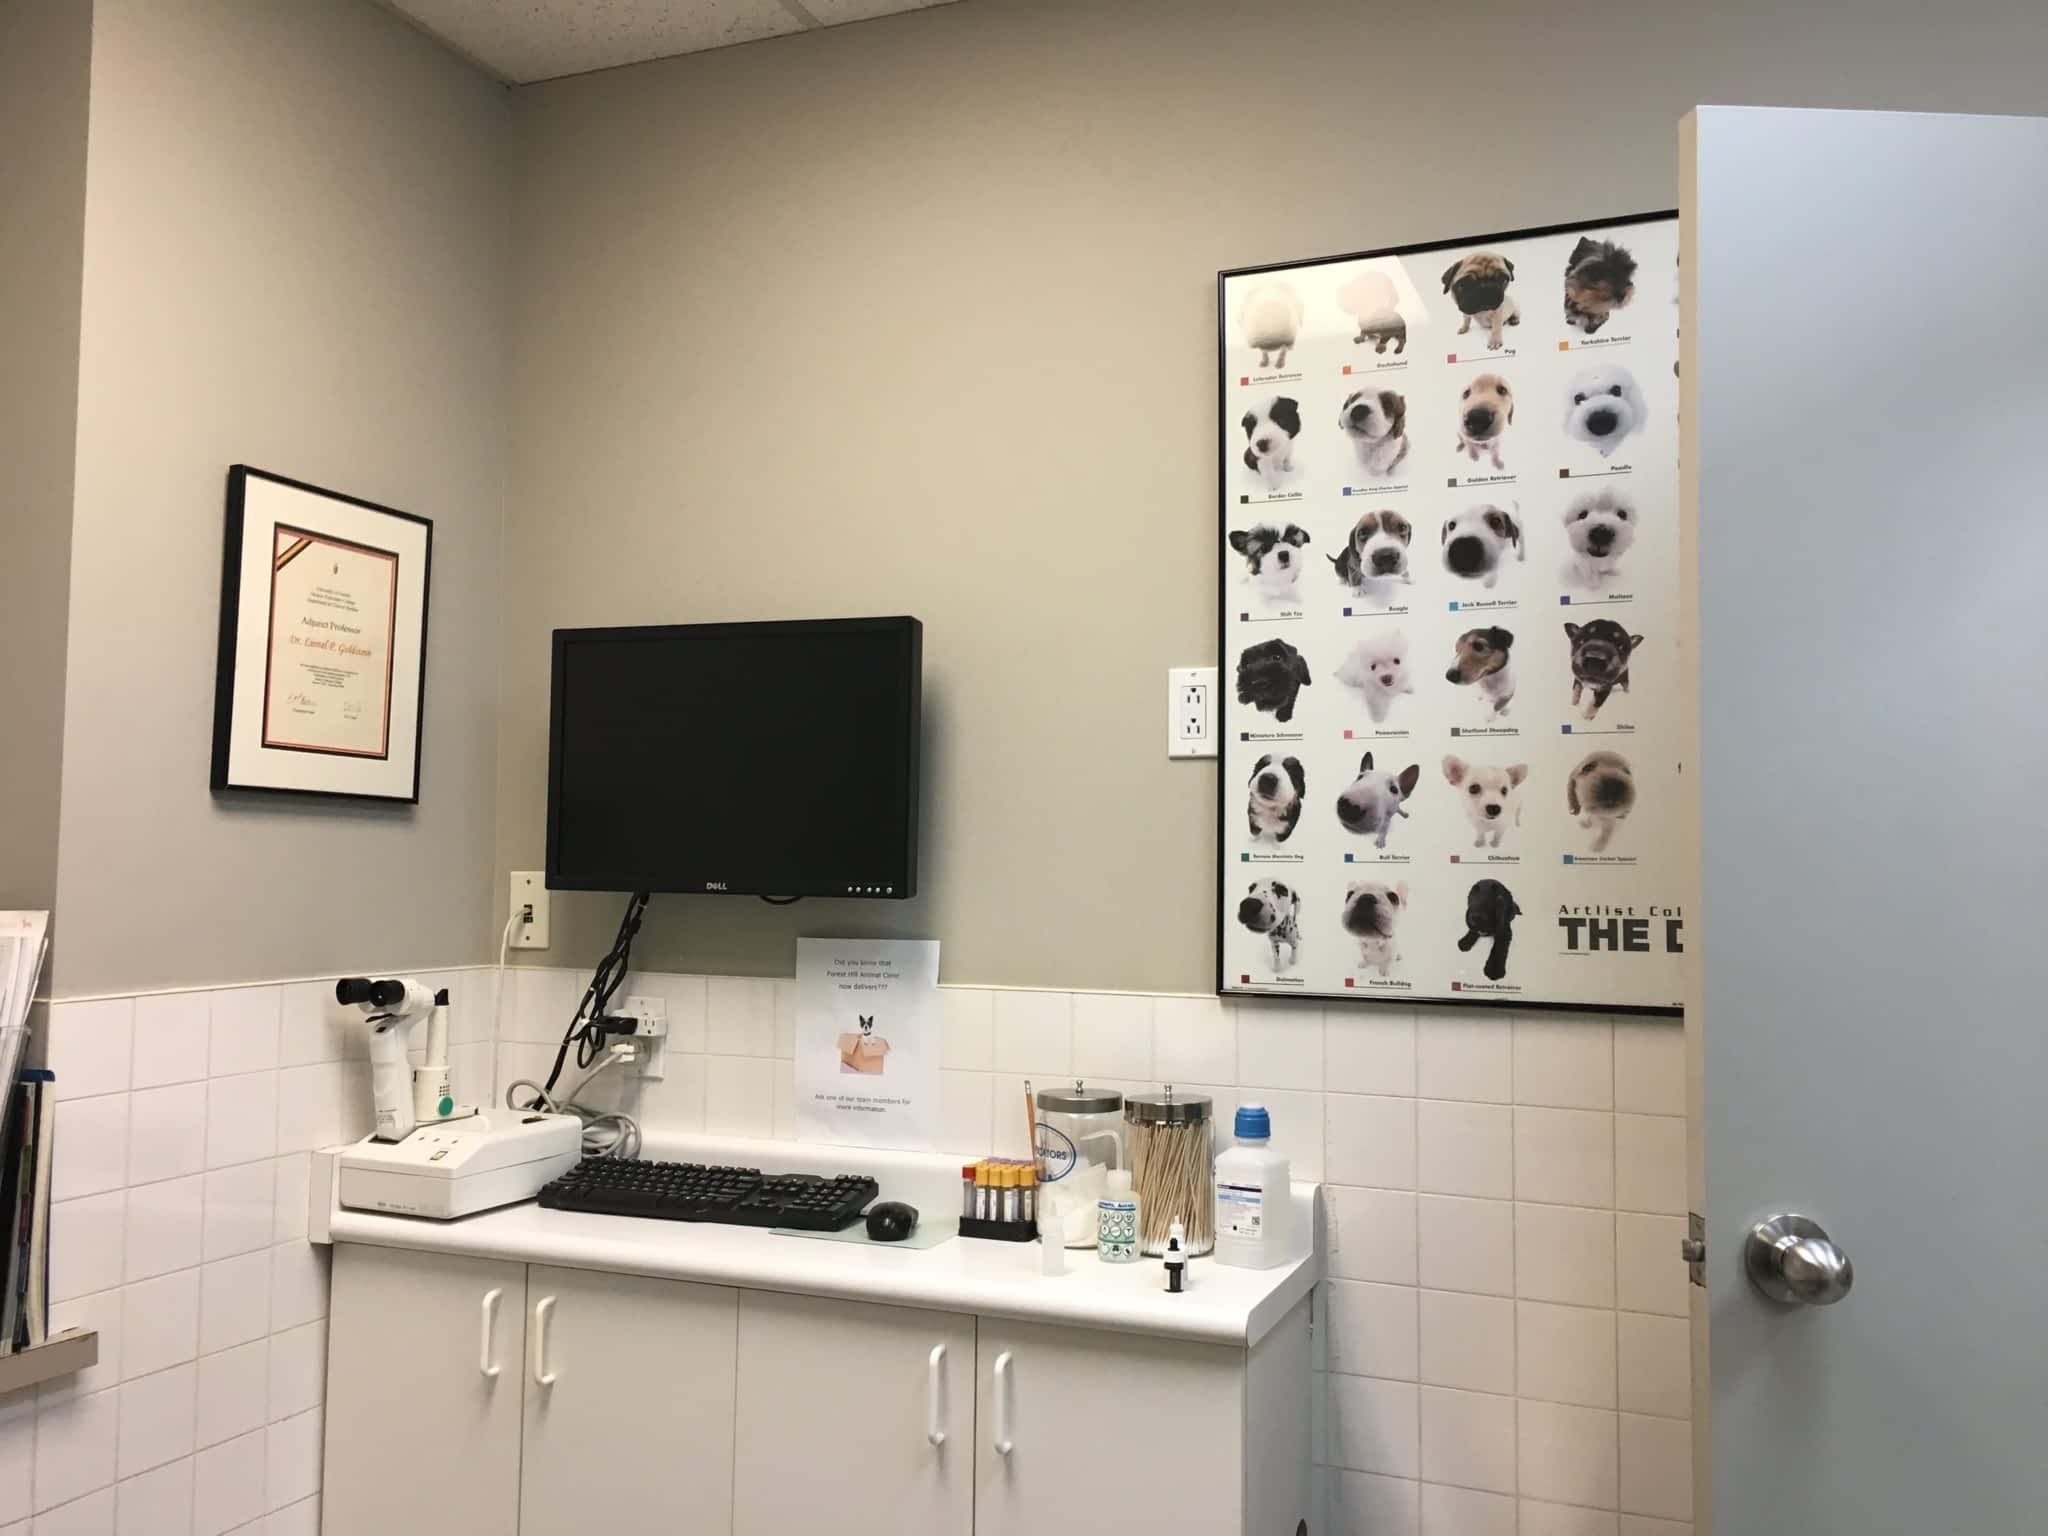 photo Forest Hill Animal Clinic